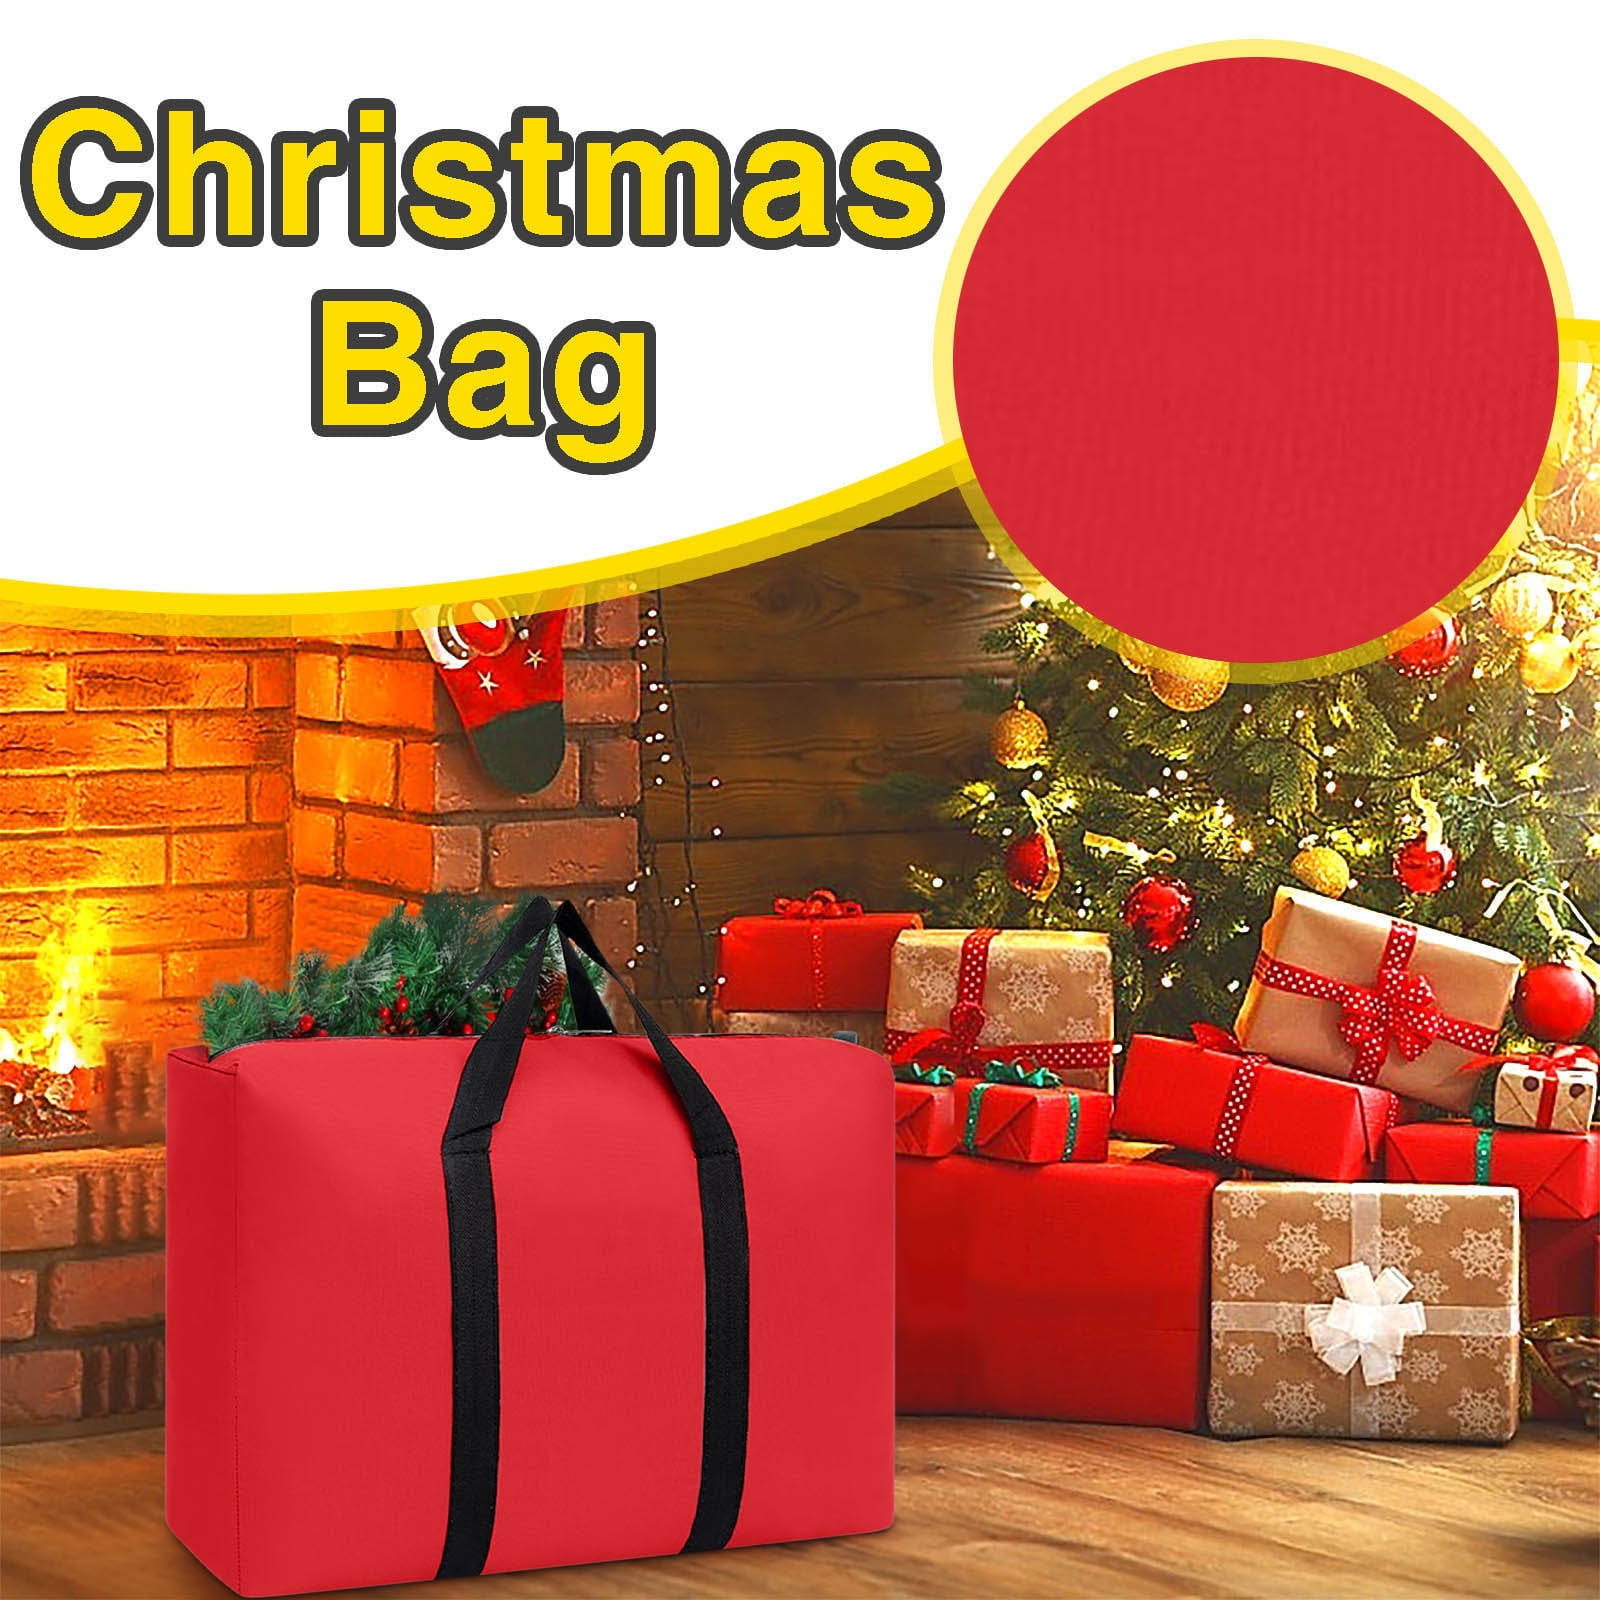 Christmas Gifts on Clearance Dqueduo Christmas Tree Storage Bag Christmas Tree Christmas Items Bag Storage Bags for Christmas Decorations, Adult